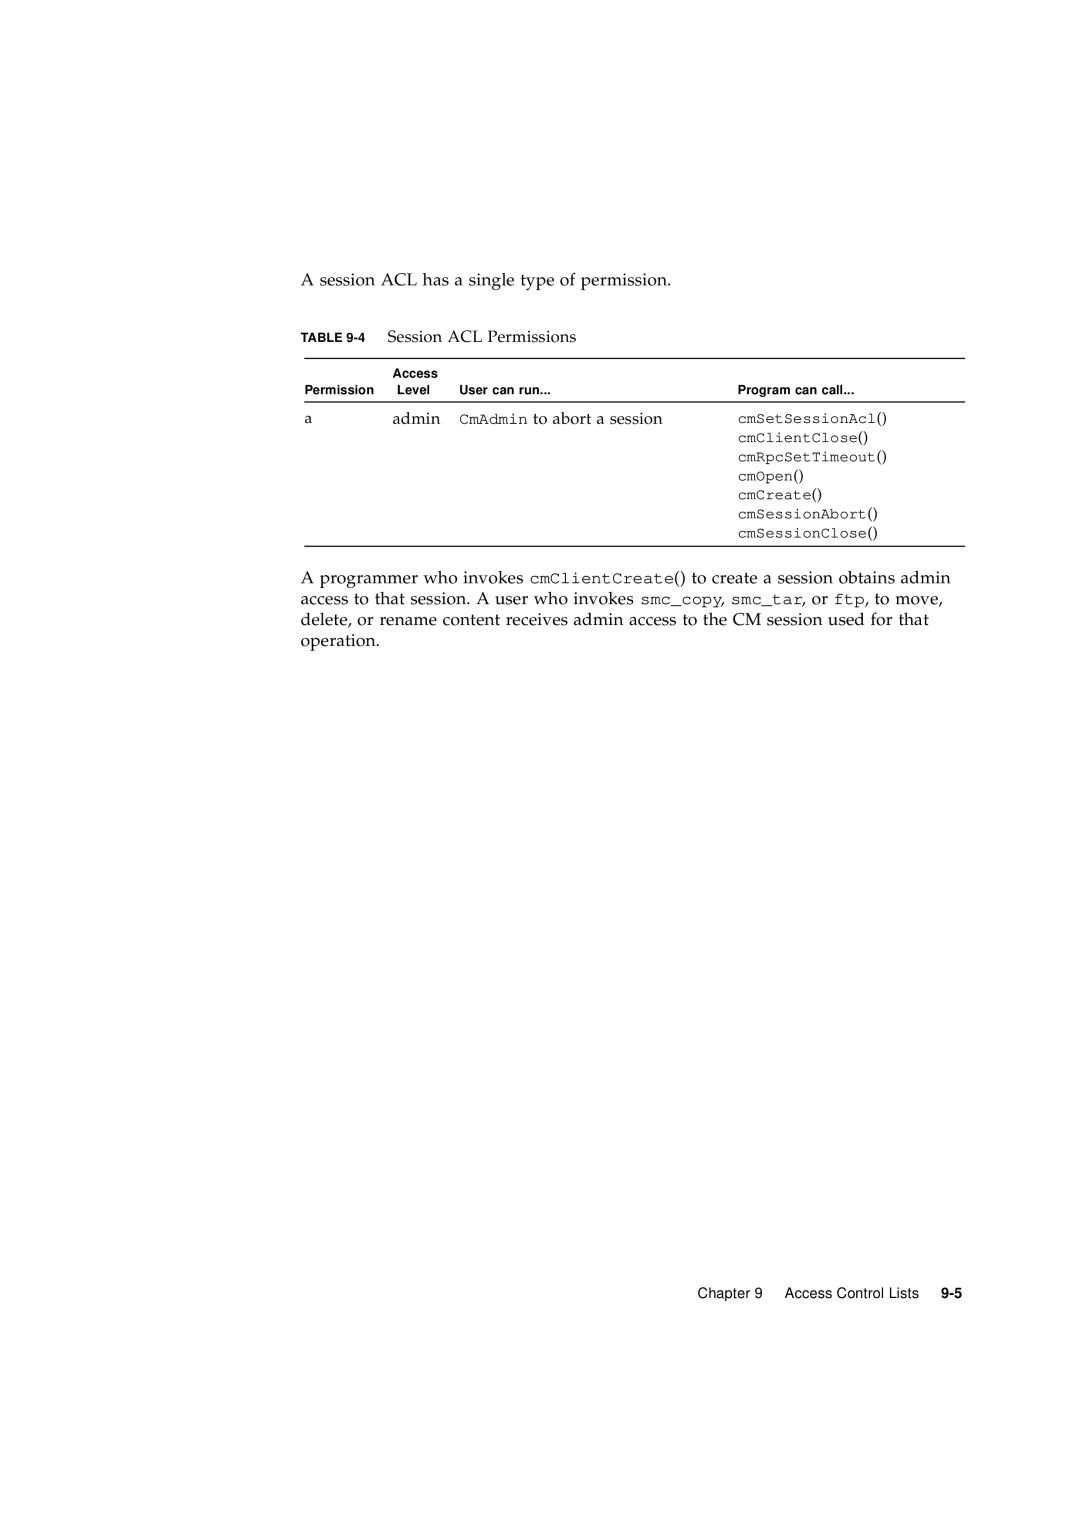 Sun Microsystems 2.1 manual A session ACL has a single type of permission 